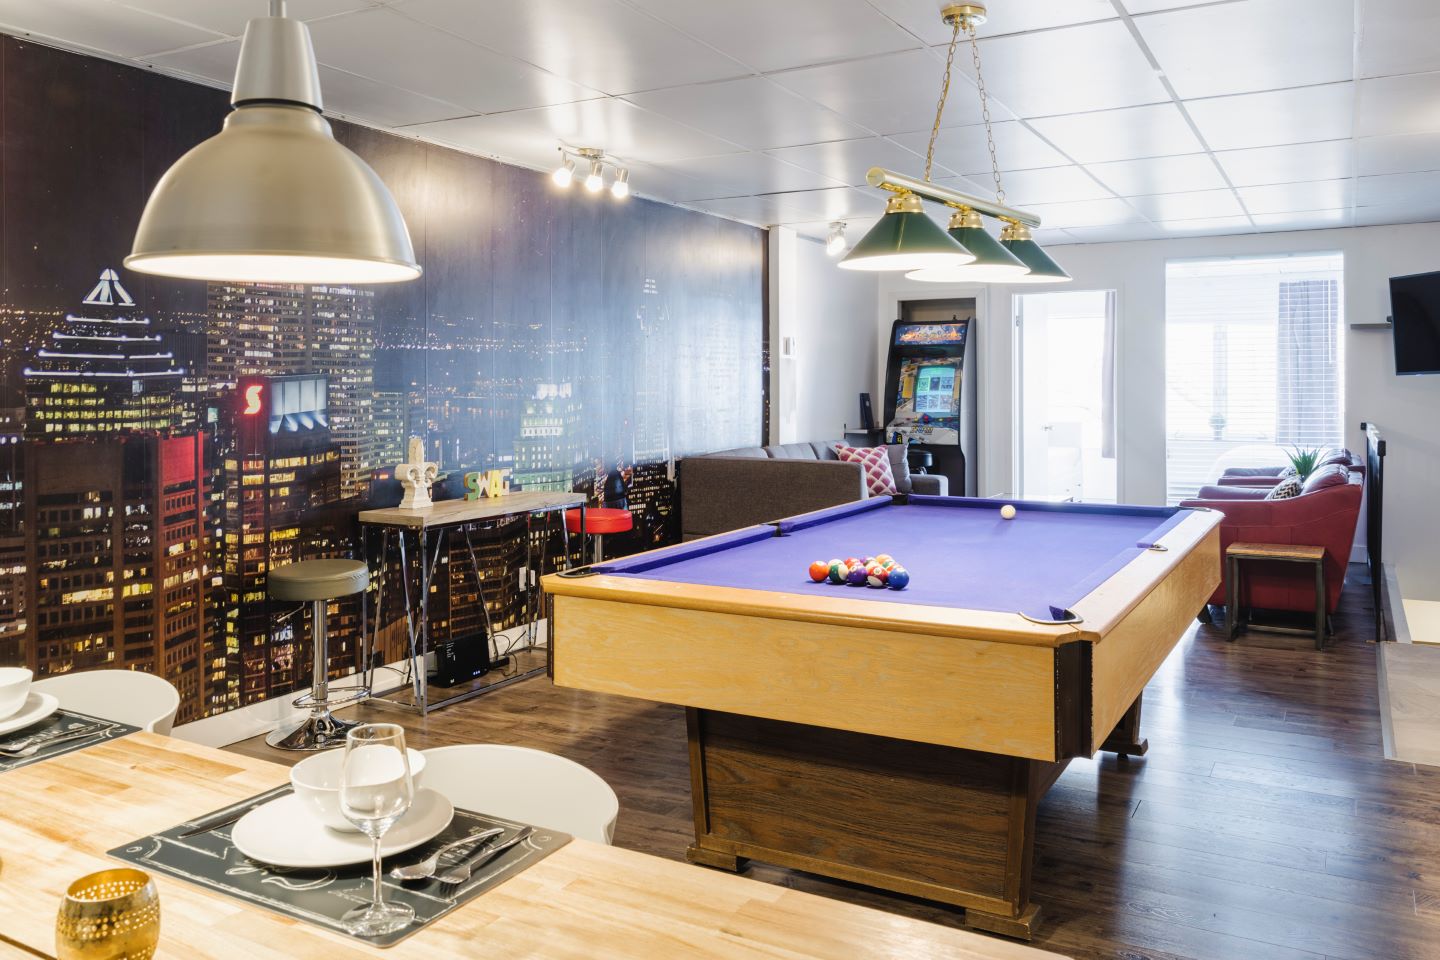 Entertainer: loft style with pool table